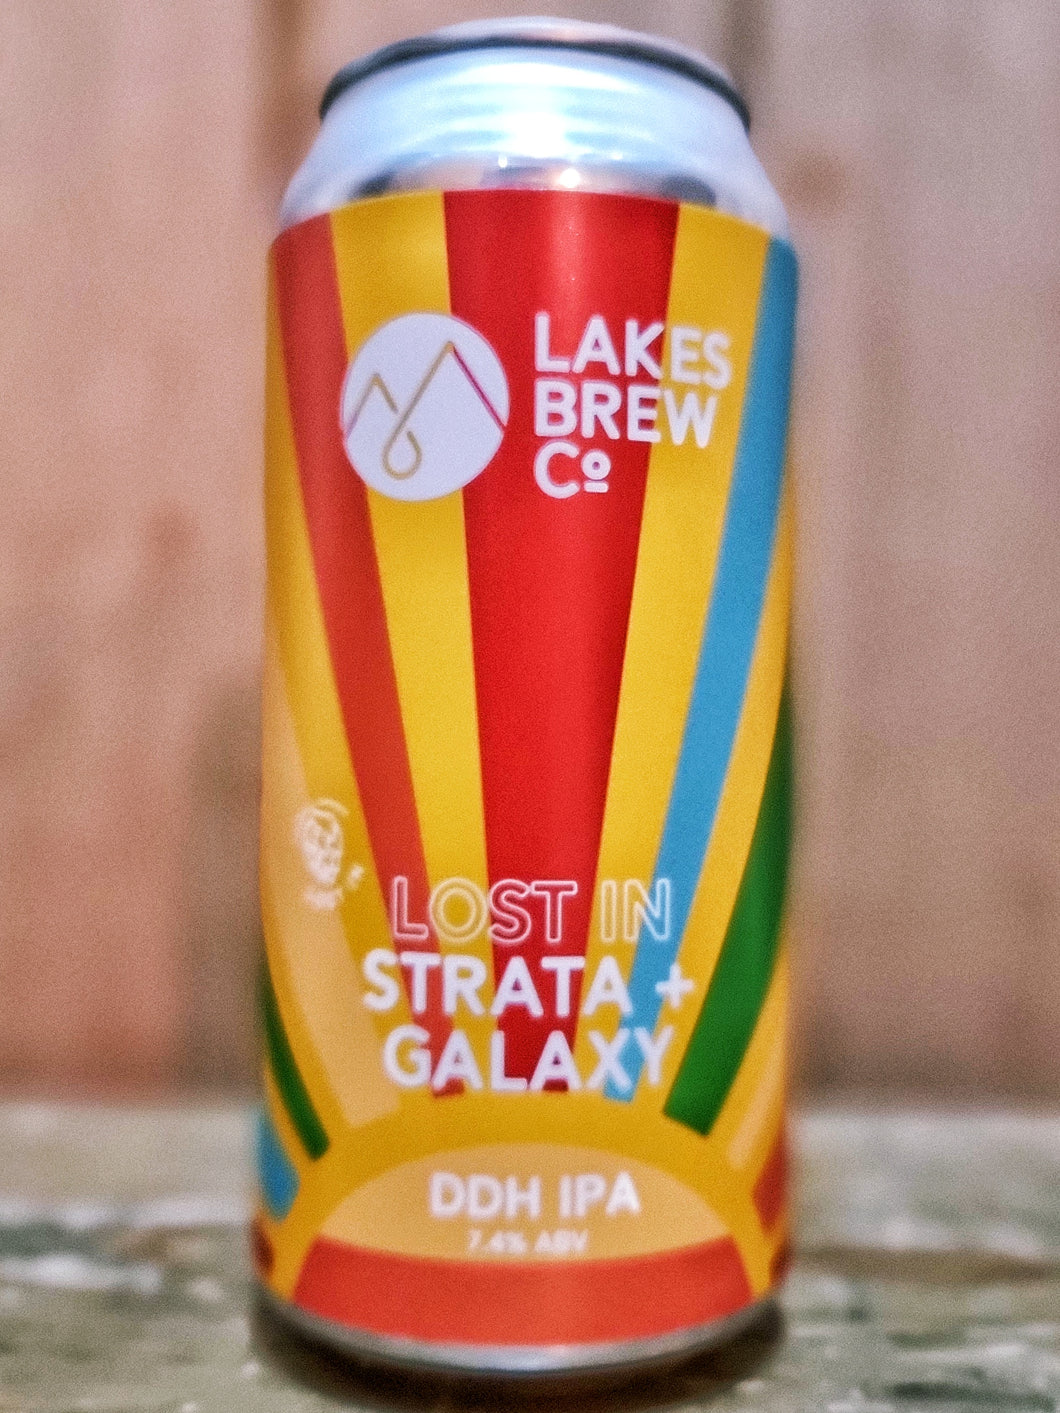 Lakes Brew Co - Lost In Strata and Galaxy